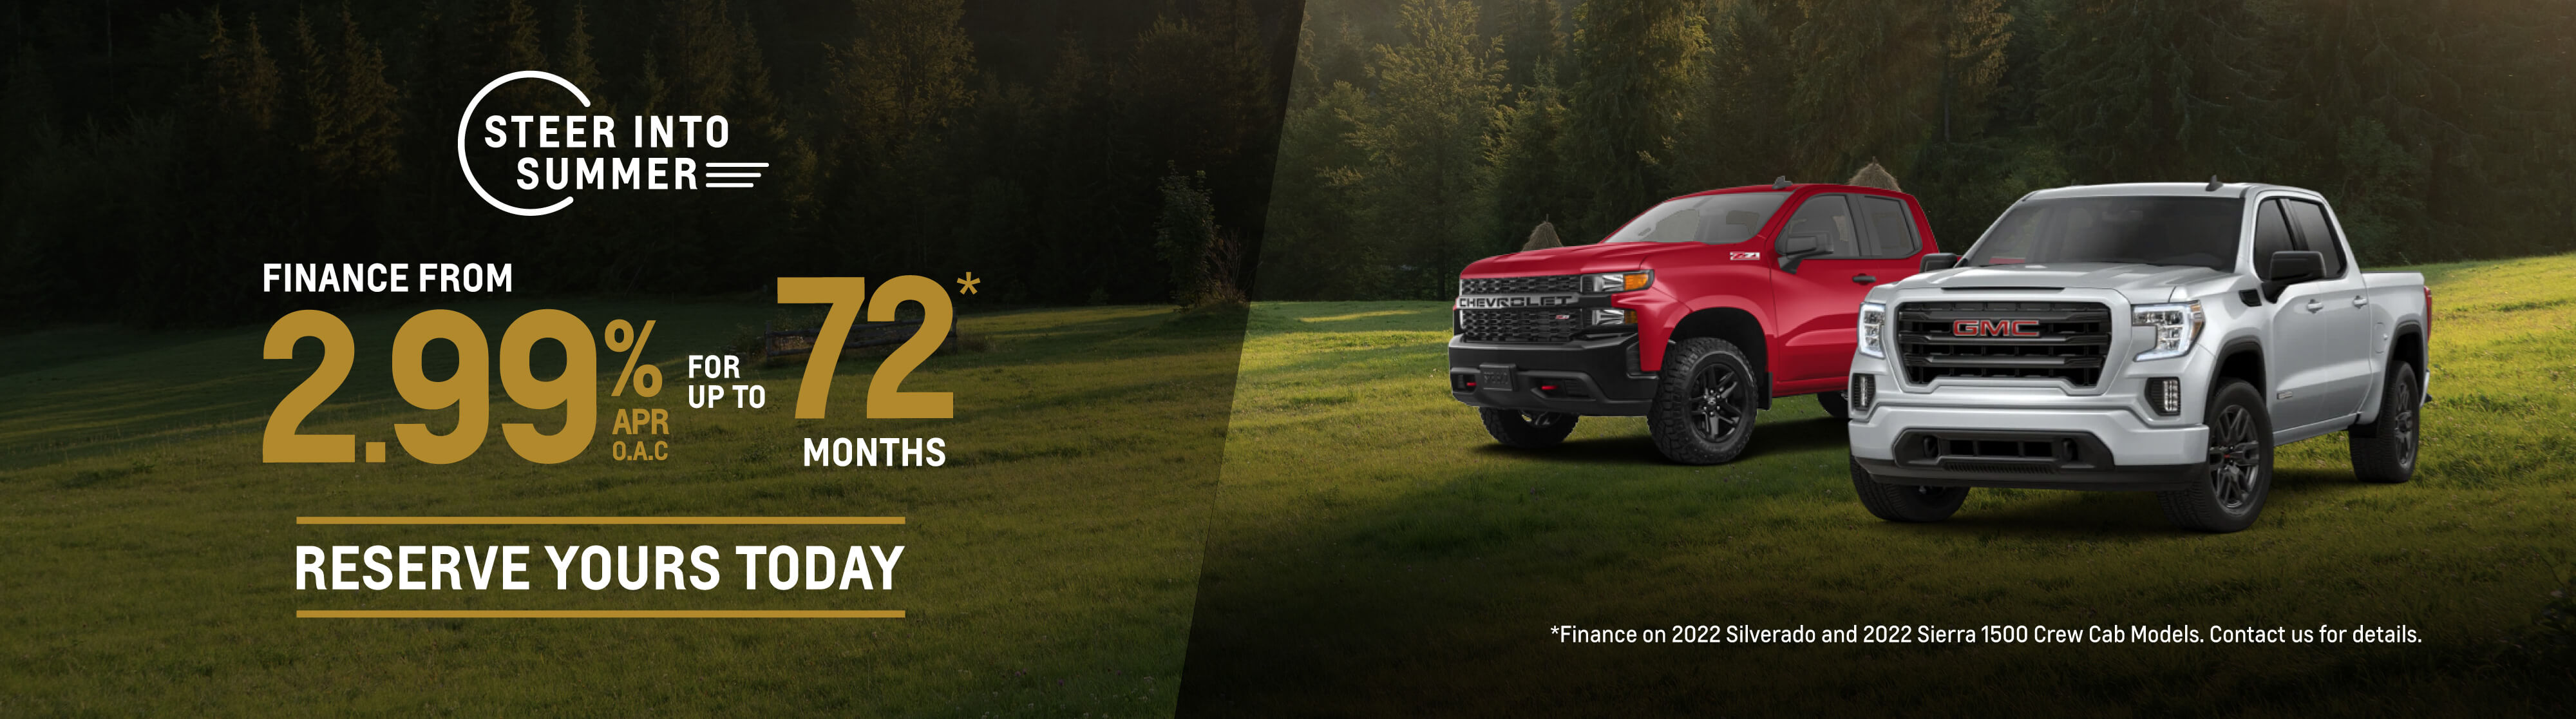 Steer Into Summer - Finance from 2.99%APR OAC for up to 72 Months. Finance on 2022 Silverado and 2022 Sierra Crew Cab Models. Conditions May Apply. Reserve Yours Today.